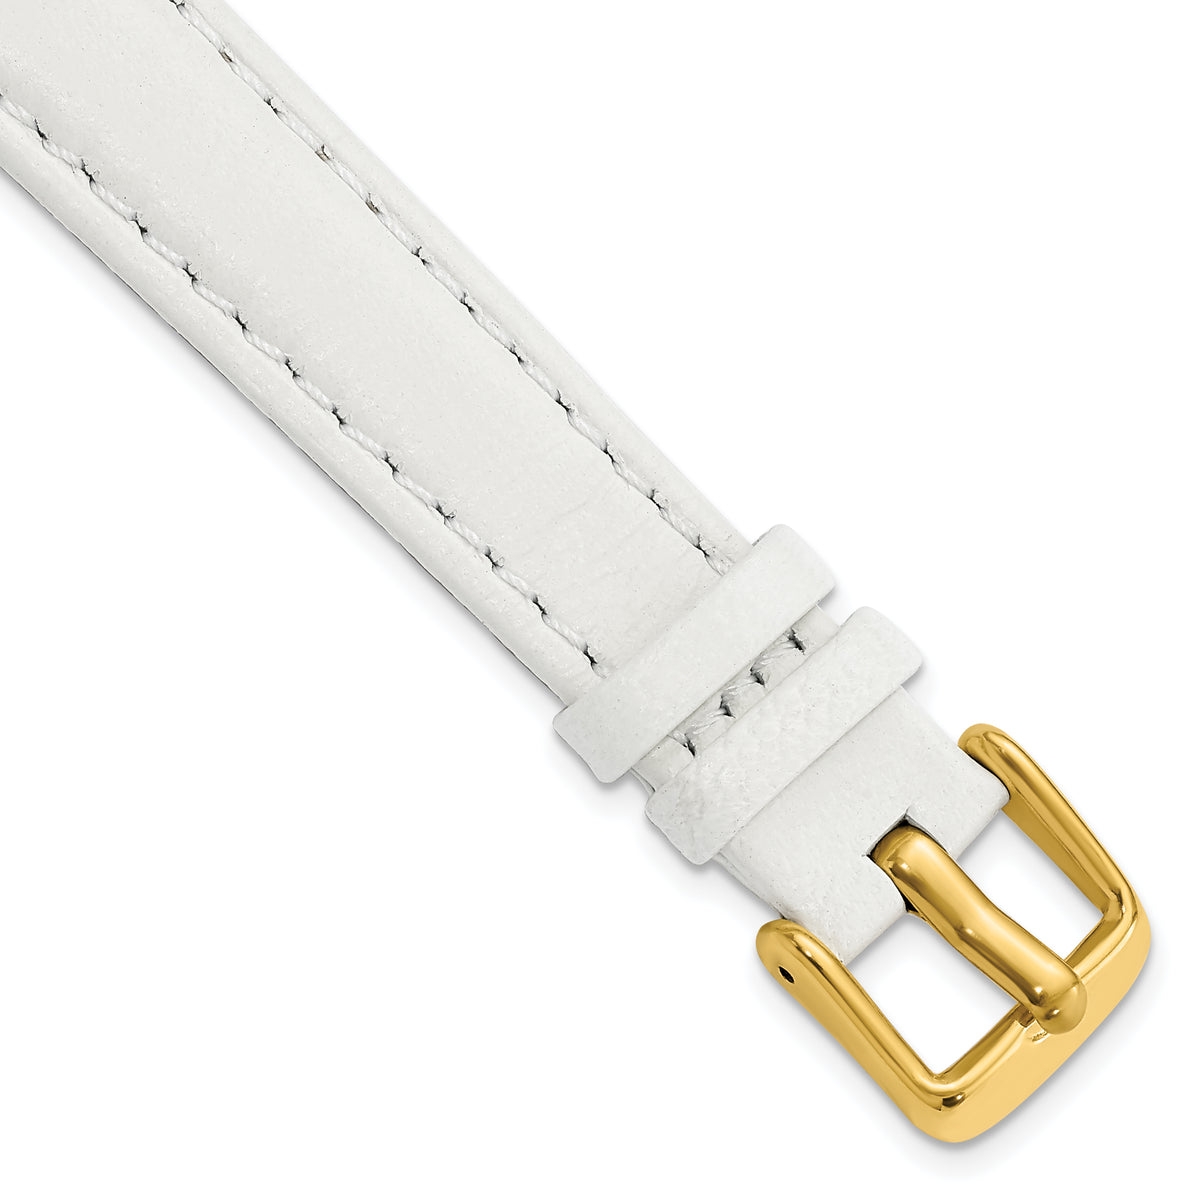 DeBeer 14mm White Glove Leather with Gold-tone Panerai Style Buckle 6.75 inch Watch Band